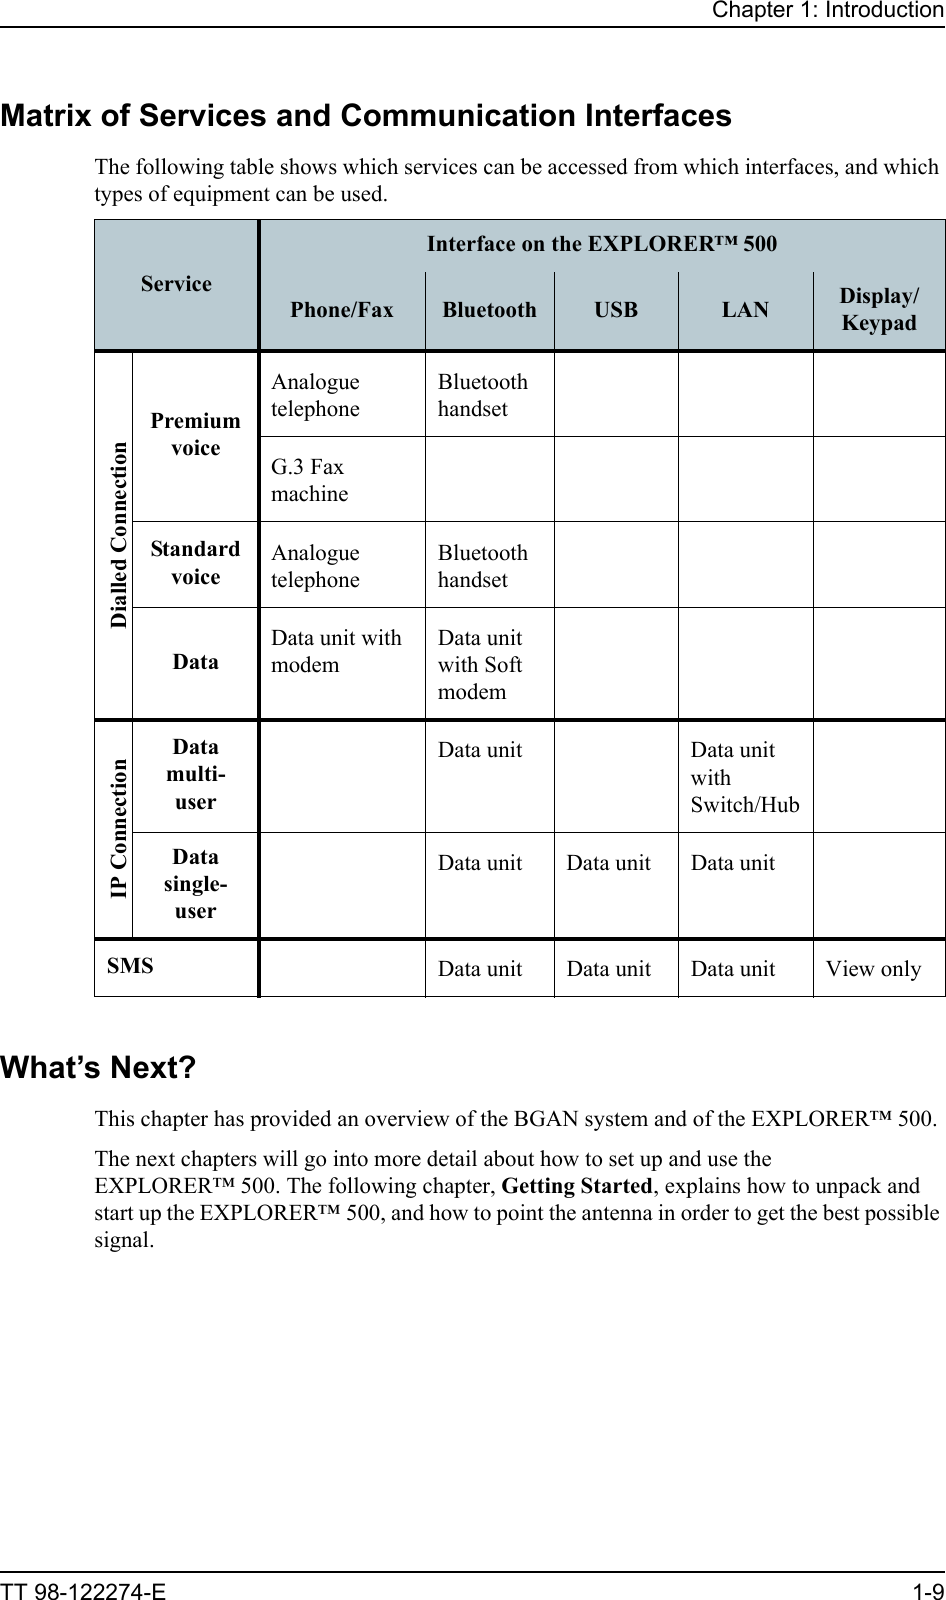 Chapter 1: IntroductionTT 98-122274-E 1-9Matrix of Services and Communication InterfacesThe following table shows which services can be accessed from which interfaces, and which types of equipment can be used.What’s Next?This chapter has provided an overview of the BGAN system and of the EXPLORER™ 500. The next chapters will go into more detail about how to set up and use the EXPLORER™ 500. The following chapter, Getting Started, explains how to unpack and start up the EXPLORER™ 500, and how to point the antenna in order to get the best possible signal.ServiceInterface on the EXPLORER™ 500Phone/Fax Bluetooth USB LAN Display/KeypadDialled ConnectionPremium voiceAnalogue telephoneBluetooth handsetG.3 Fax machineStandard voiceAnalogue telephoneBluetooth handsetDataData unit with modemData unit with Soft modemIP ConnectionDatamulti-userData unit Data unit with Switch/HubDatasingle-userData unit Data unit Data unitSMS Data unit Data unit Data unit View only